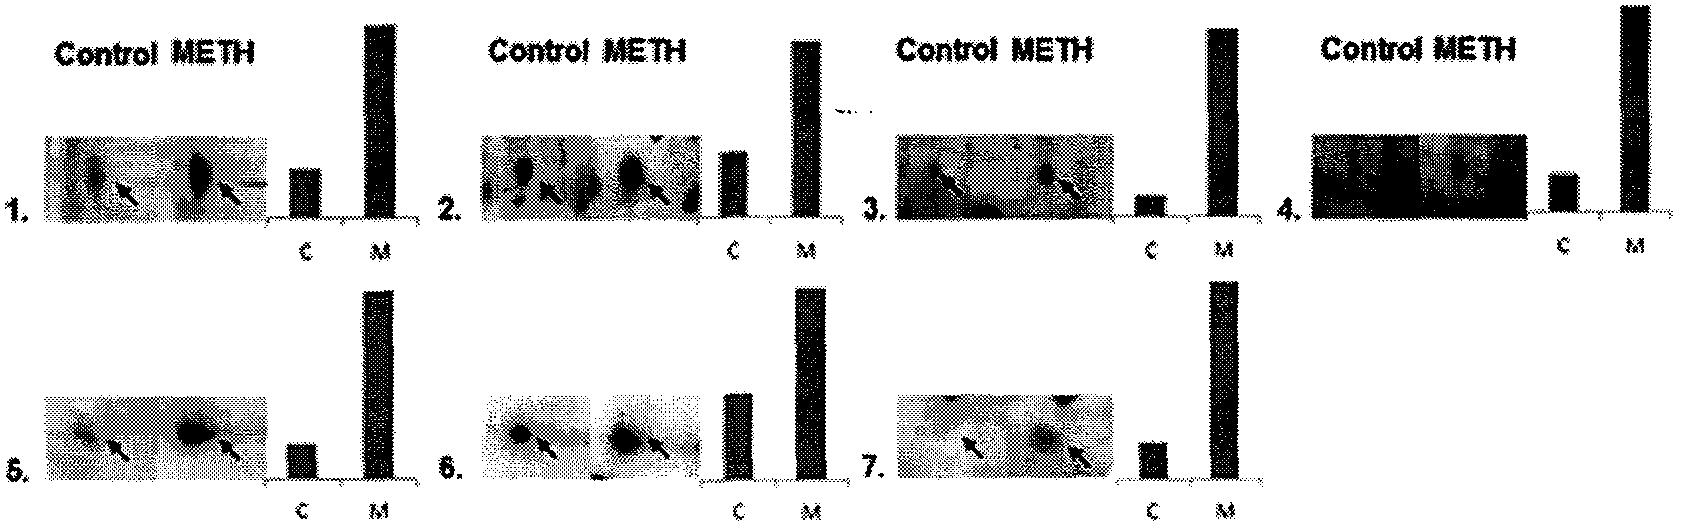 Application of complement factor H (CFH) to genetic expression products of methamphetamine (METH) addiction patient